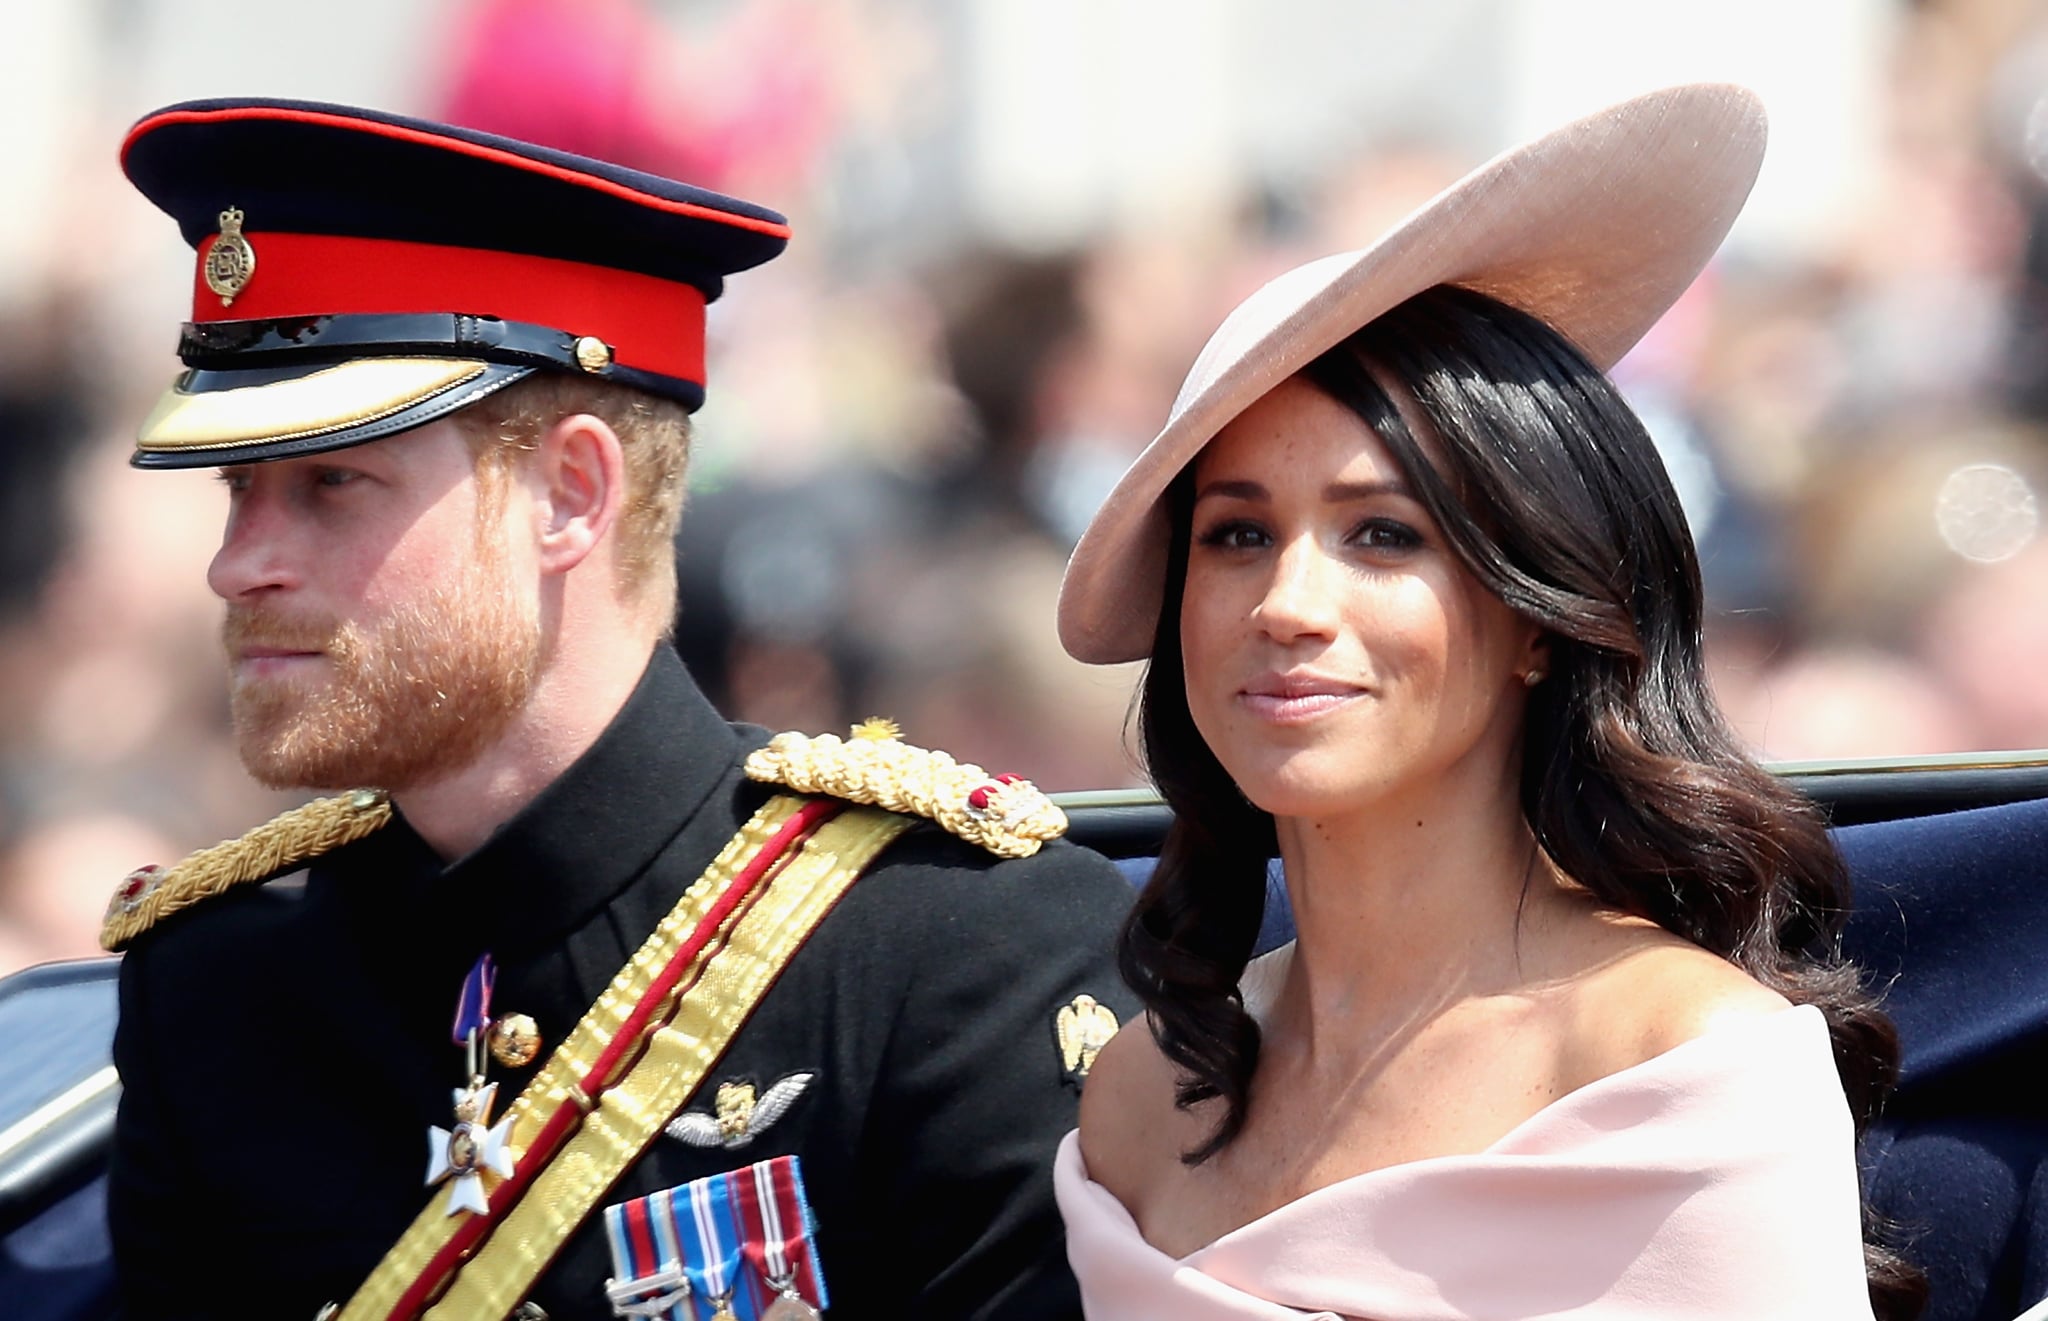 LONDON, ENGLAND - JUNE 9: Meghan, Duchess of Sussex and Prince Harry, Duke of Sussex during Trooping The Color at The Mall on June 9, 2018 in London, England.  The annual ceremony, attended by over 1,400 guards and cavalrymen, is believed to have been performed for the first time during the reign of King Charles II.  The parade marks the sovereign's official birthday, although the Queen's actual birthday is on April 21st.  .  (Photo by Chris Jackson/Getty Images)